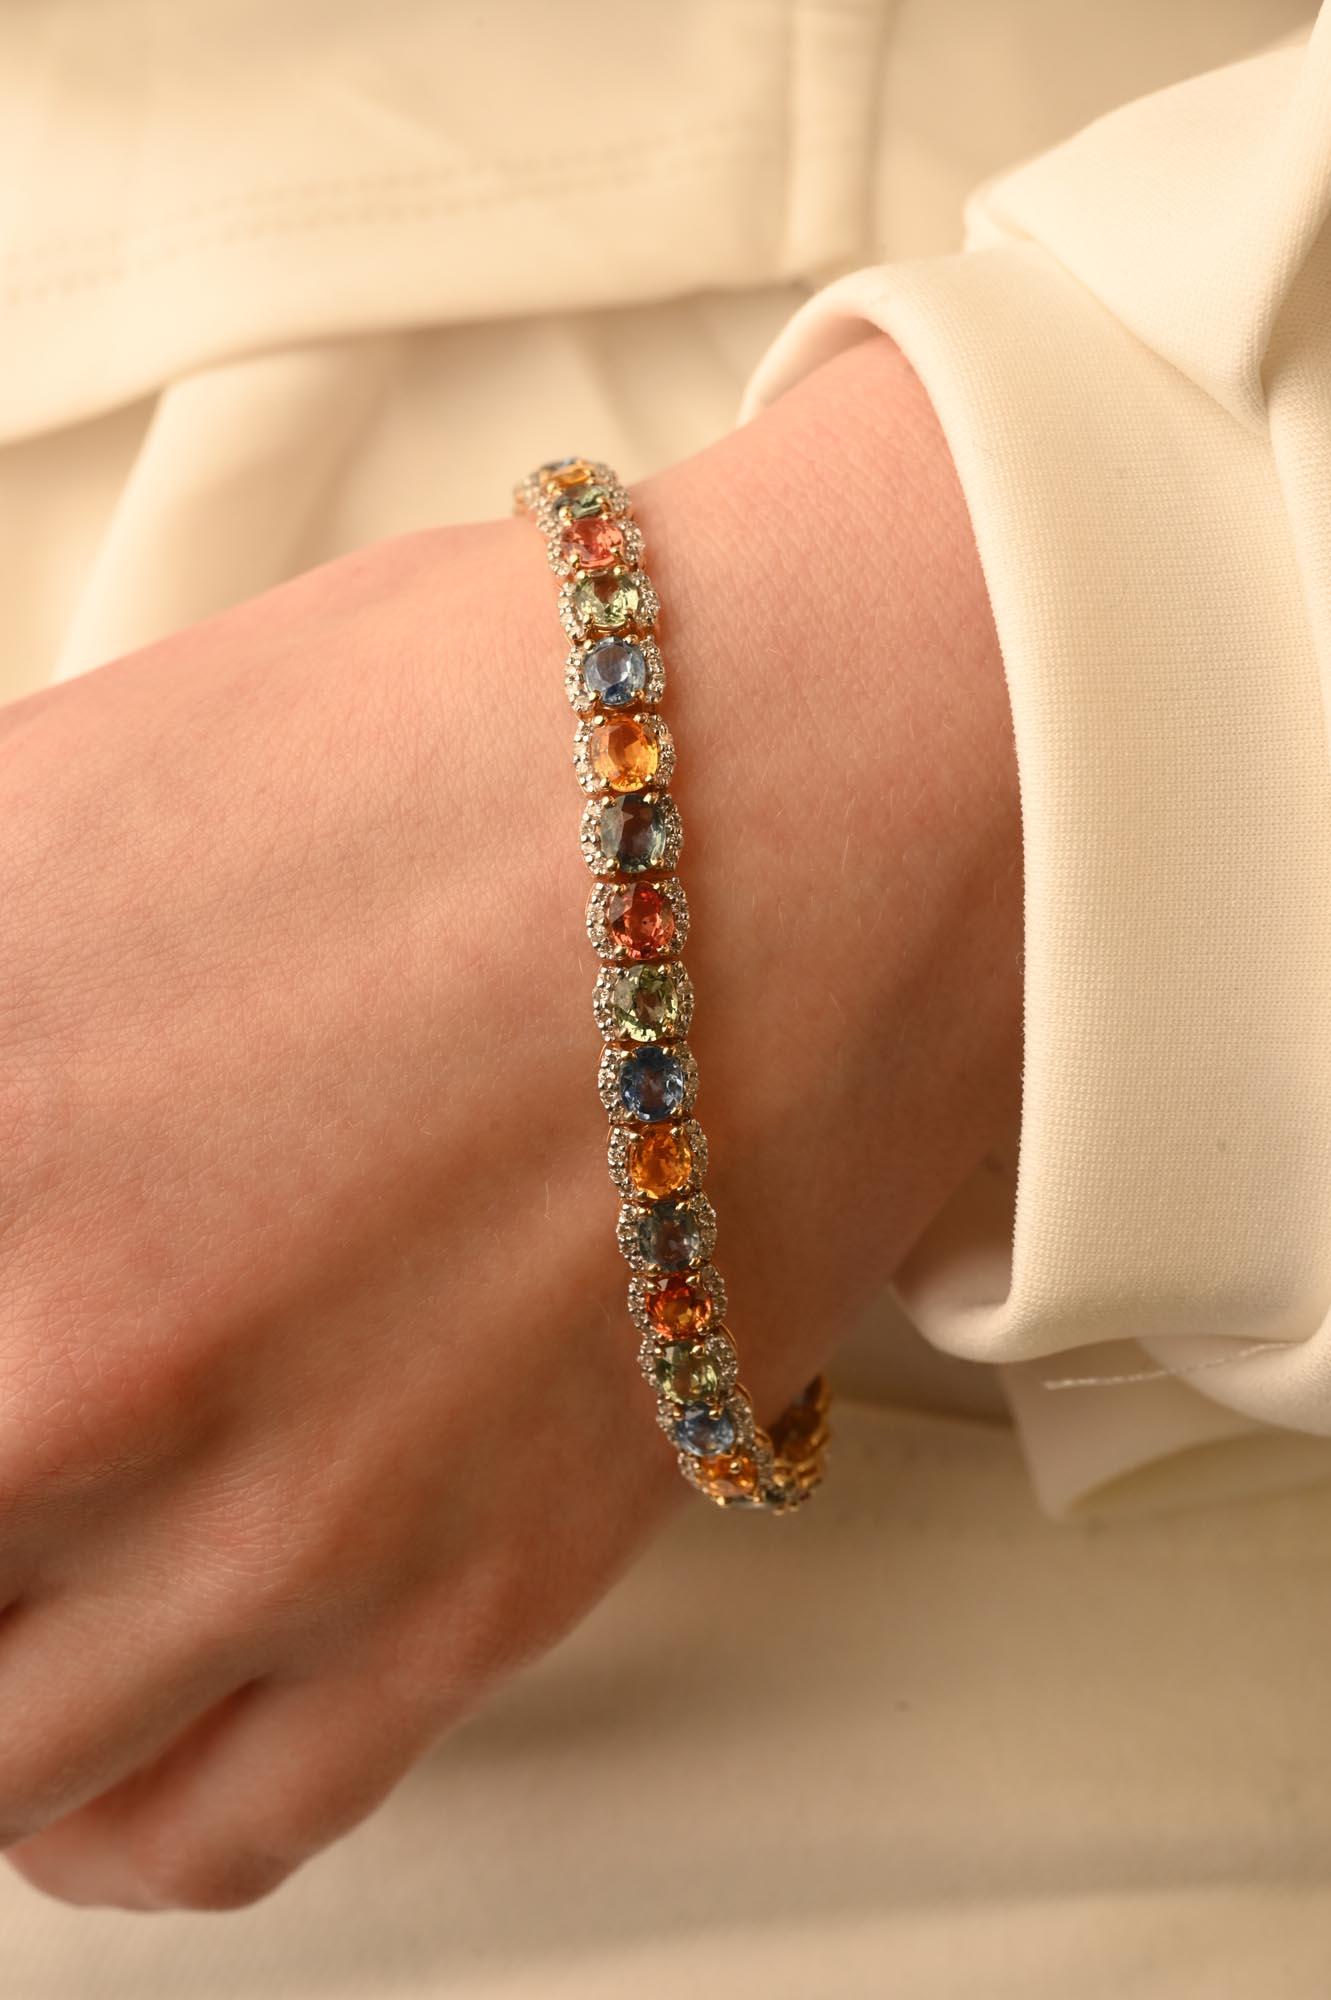 This Beautiful Multi Sapphire Tennis Bracelet with Diamonds in 14K gold showcases 35 endlessly sparkling natural sapphires, weighing 17.85 carats. It measures 7 inches long in length. 
Multi sapphire gemstone releases the strength of creativity and